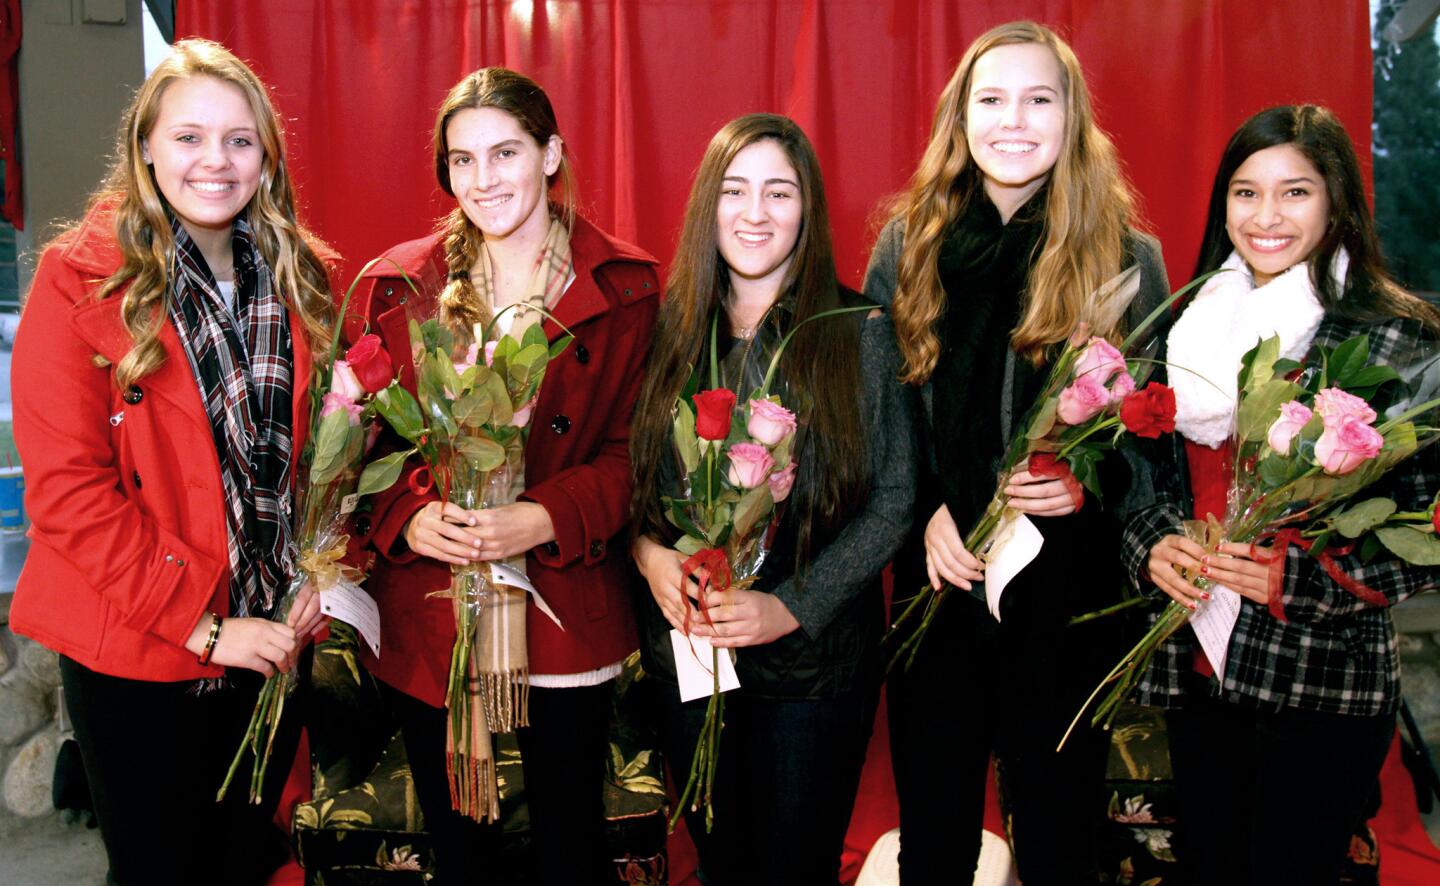 The La Cañada Flintridge Royal Court for 2016 was announced during the 21st Festival in Lights at Memorial Park in La Cañada Flintridge on Friday, Dec. 4, 2015. From left are Kara Bradley, Heather Connolly, Sloan Elmassian, Katy Paynter and Jessy Sitaramya.